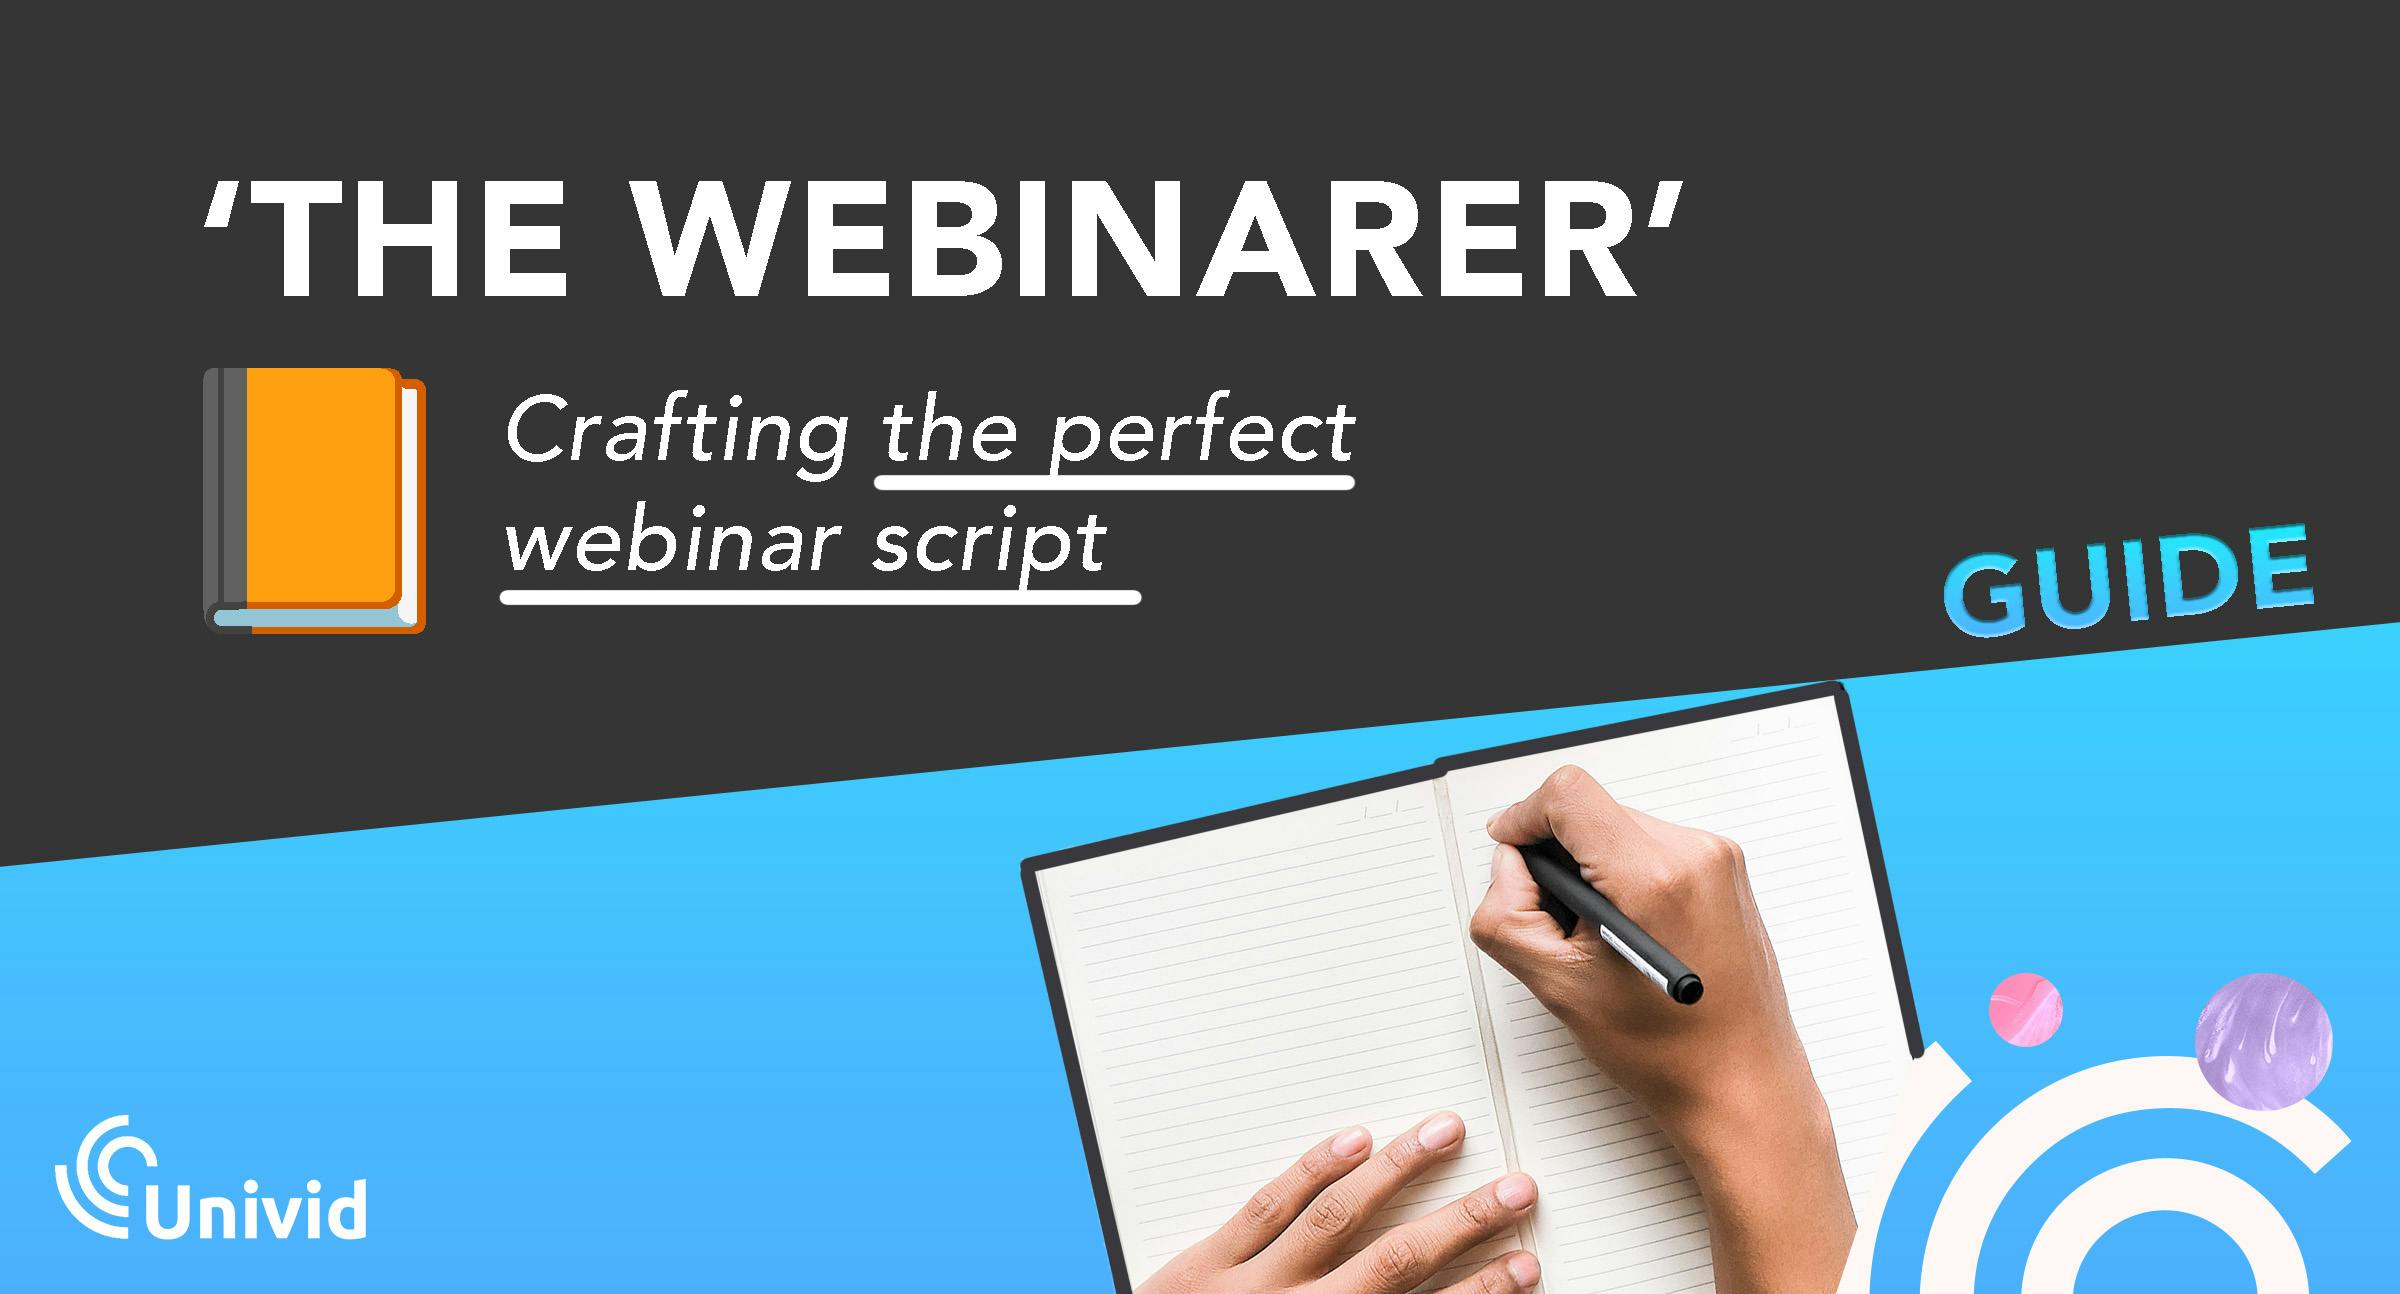 The Webinarer is the ultimate guide for webinar hosts. This 5 step guide will take you through writing the perfect webinar script. From shaping your story to presenting and engaging with attendees. Get ready to host a magical experience!